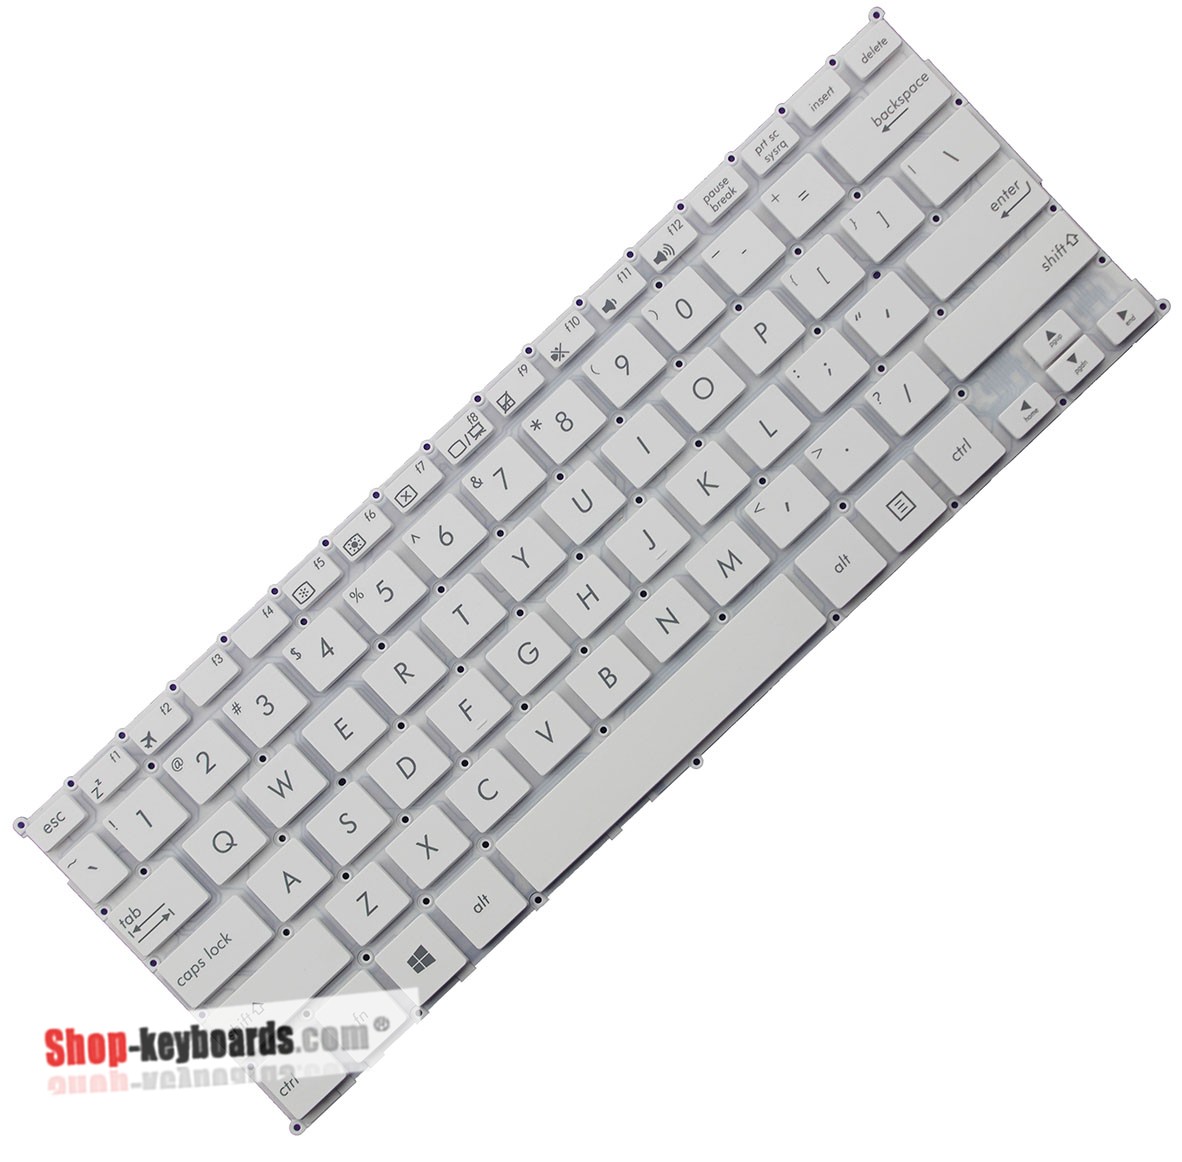 Asus 0KNL0-1122BE00 Keyboard replacement